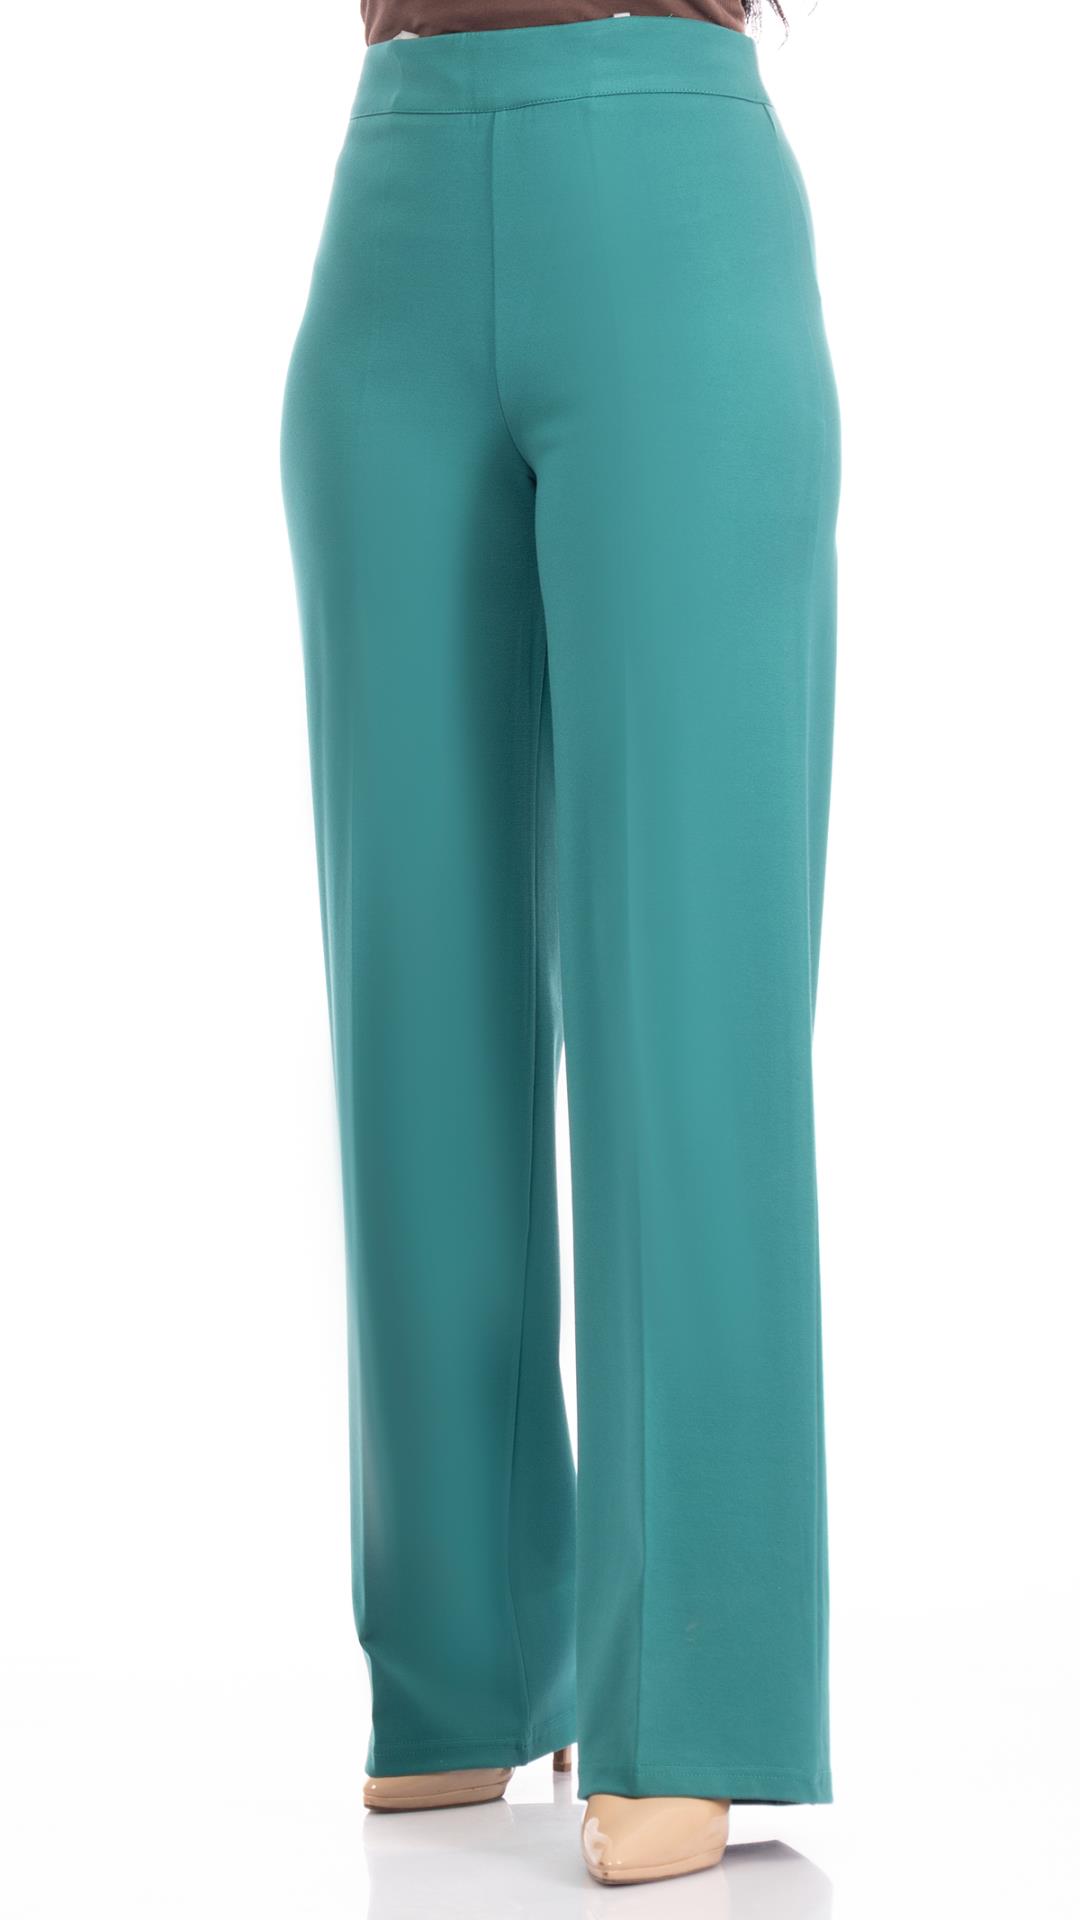 Lycra formal pants with a zip at the back